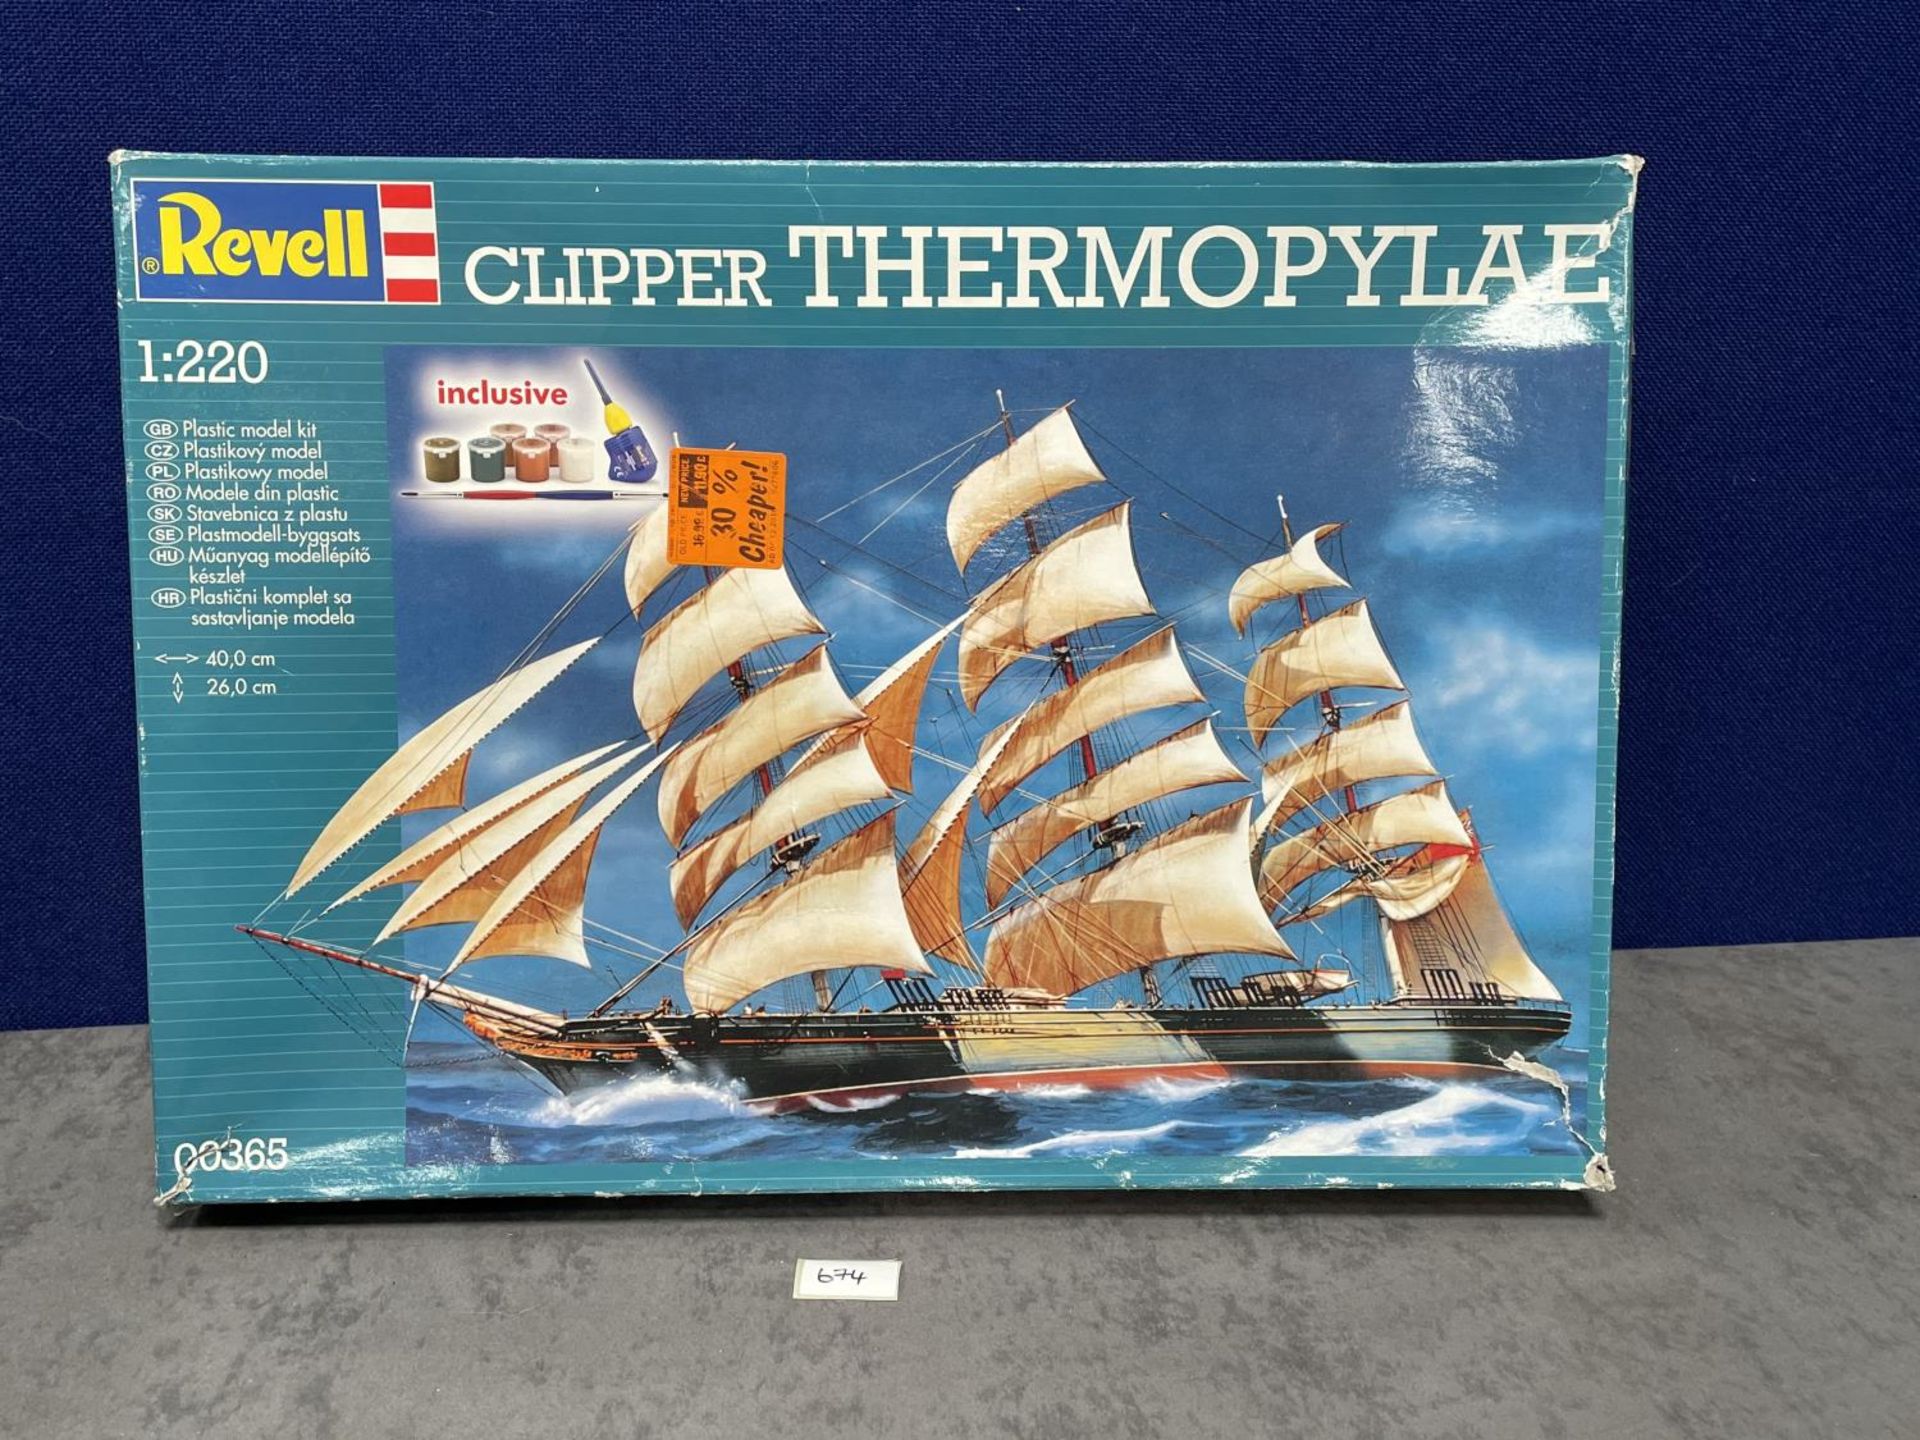 Revell Scale 1/220 #00365 Clipper Thermopylae On Sprues With Instructions And Paint In Box